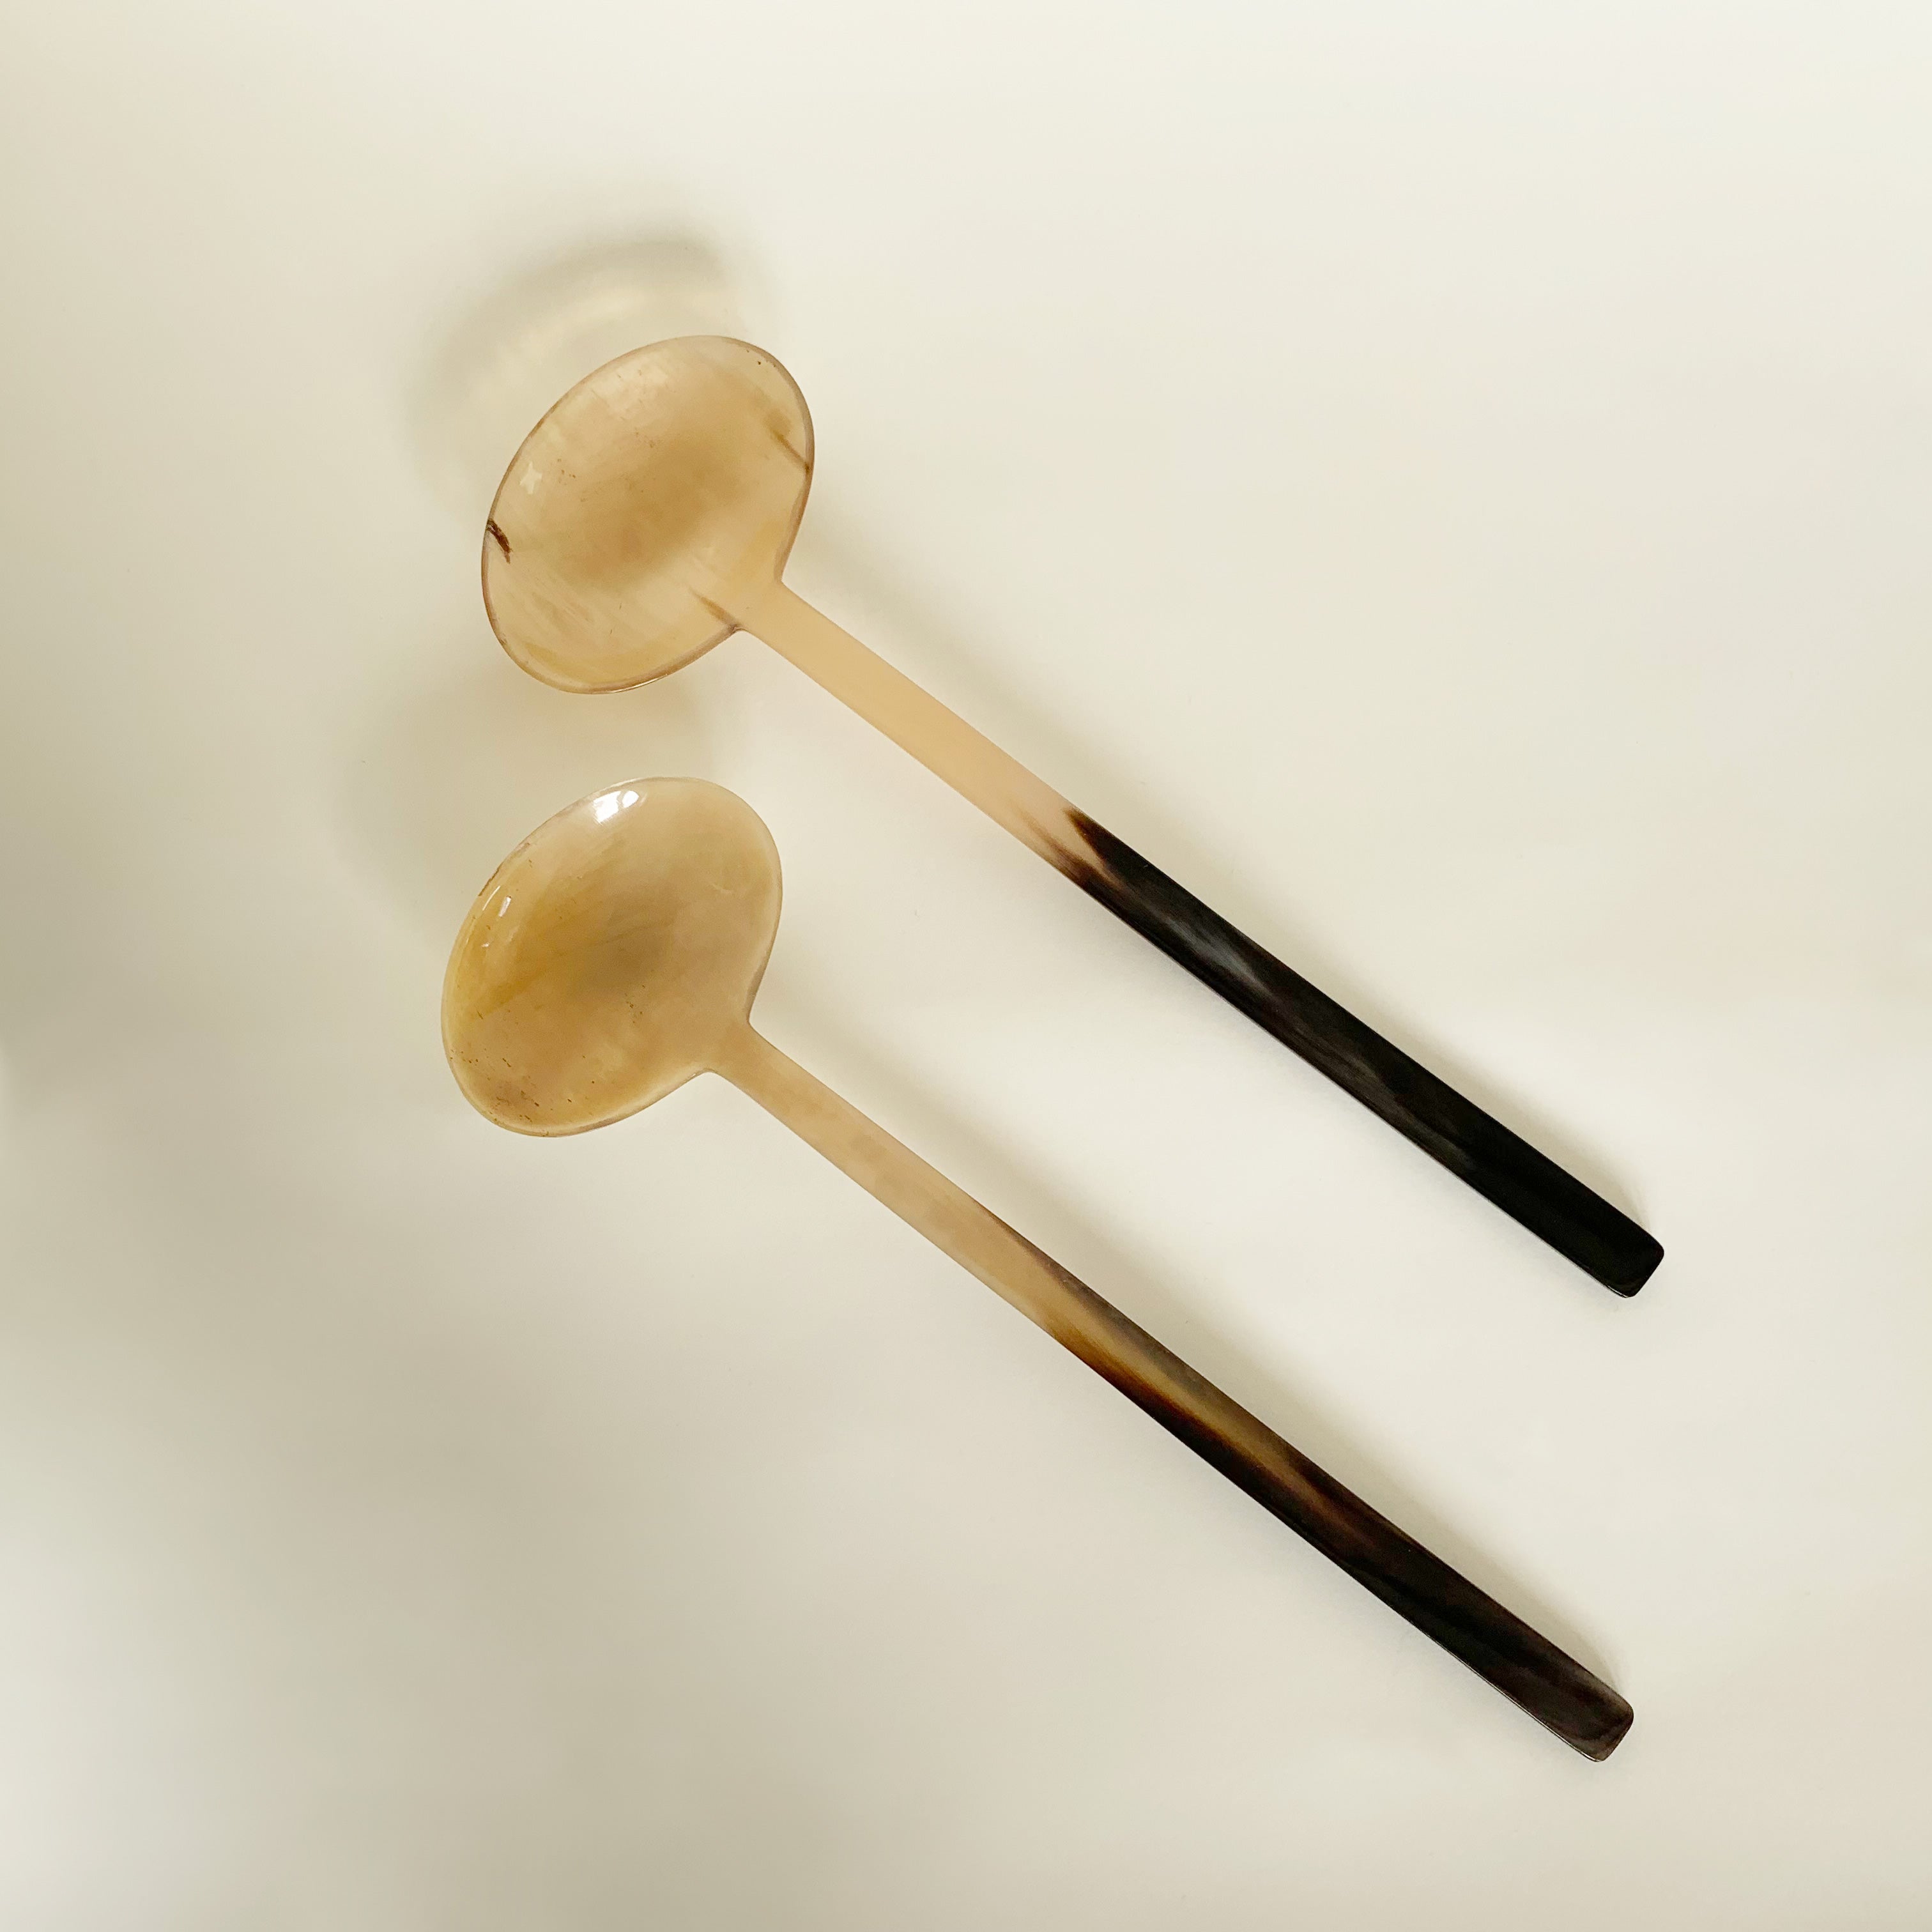 Image of M+A NYC Salad Servers 11" in the color Amber